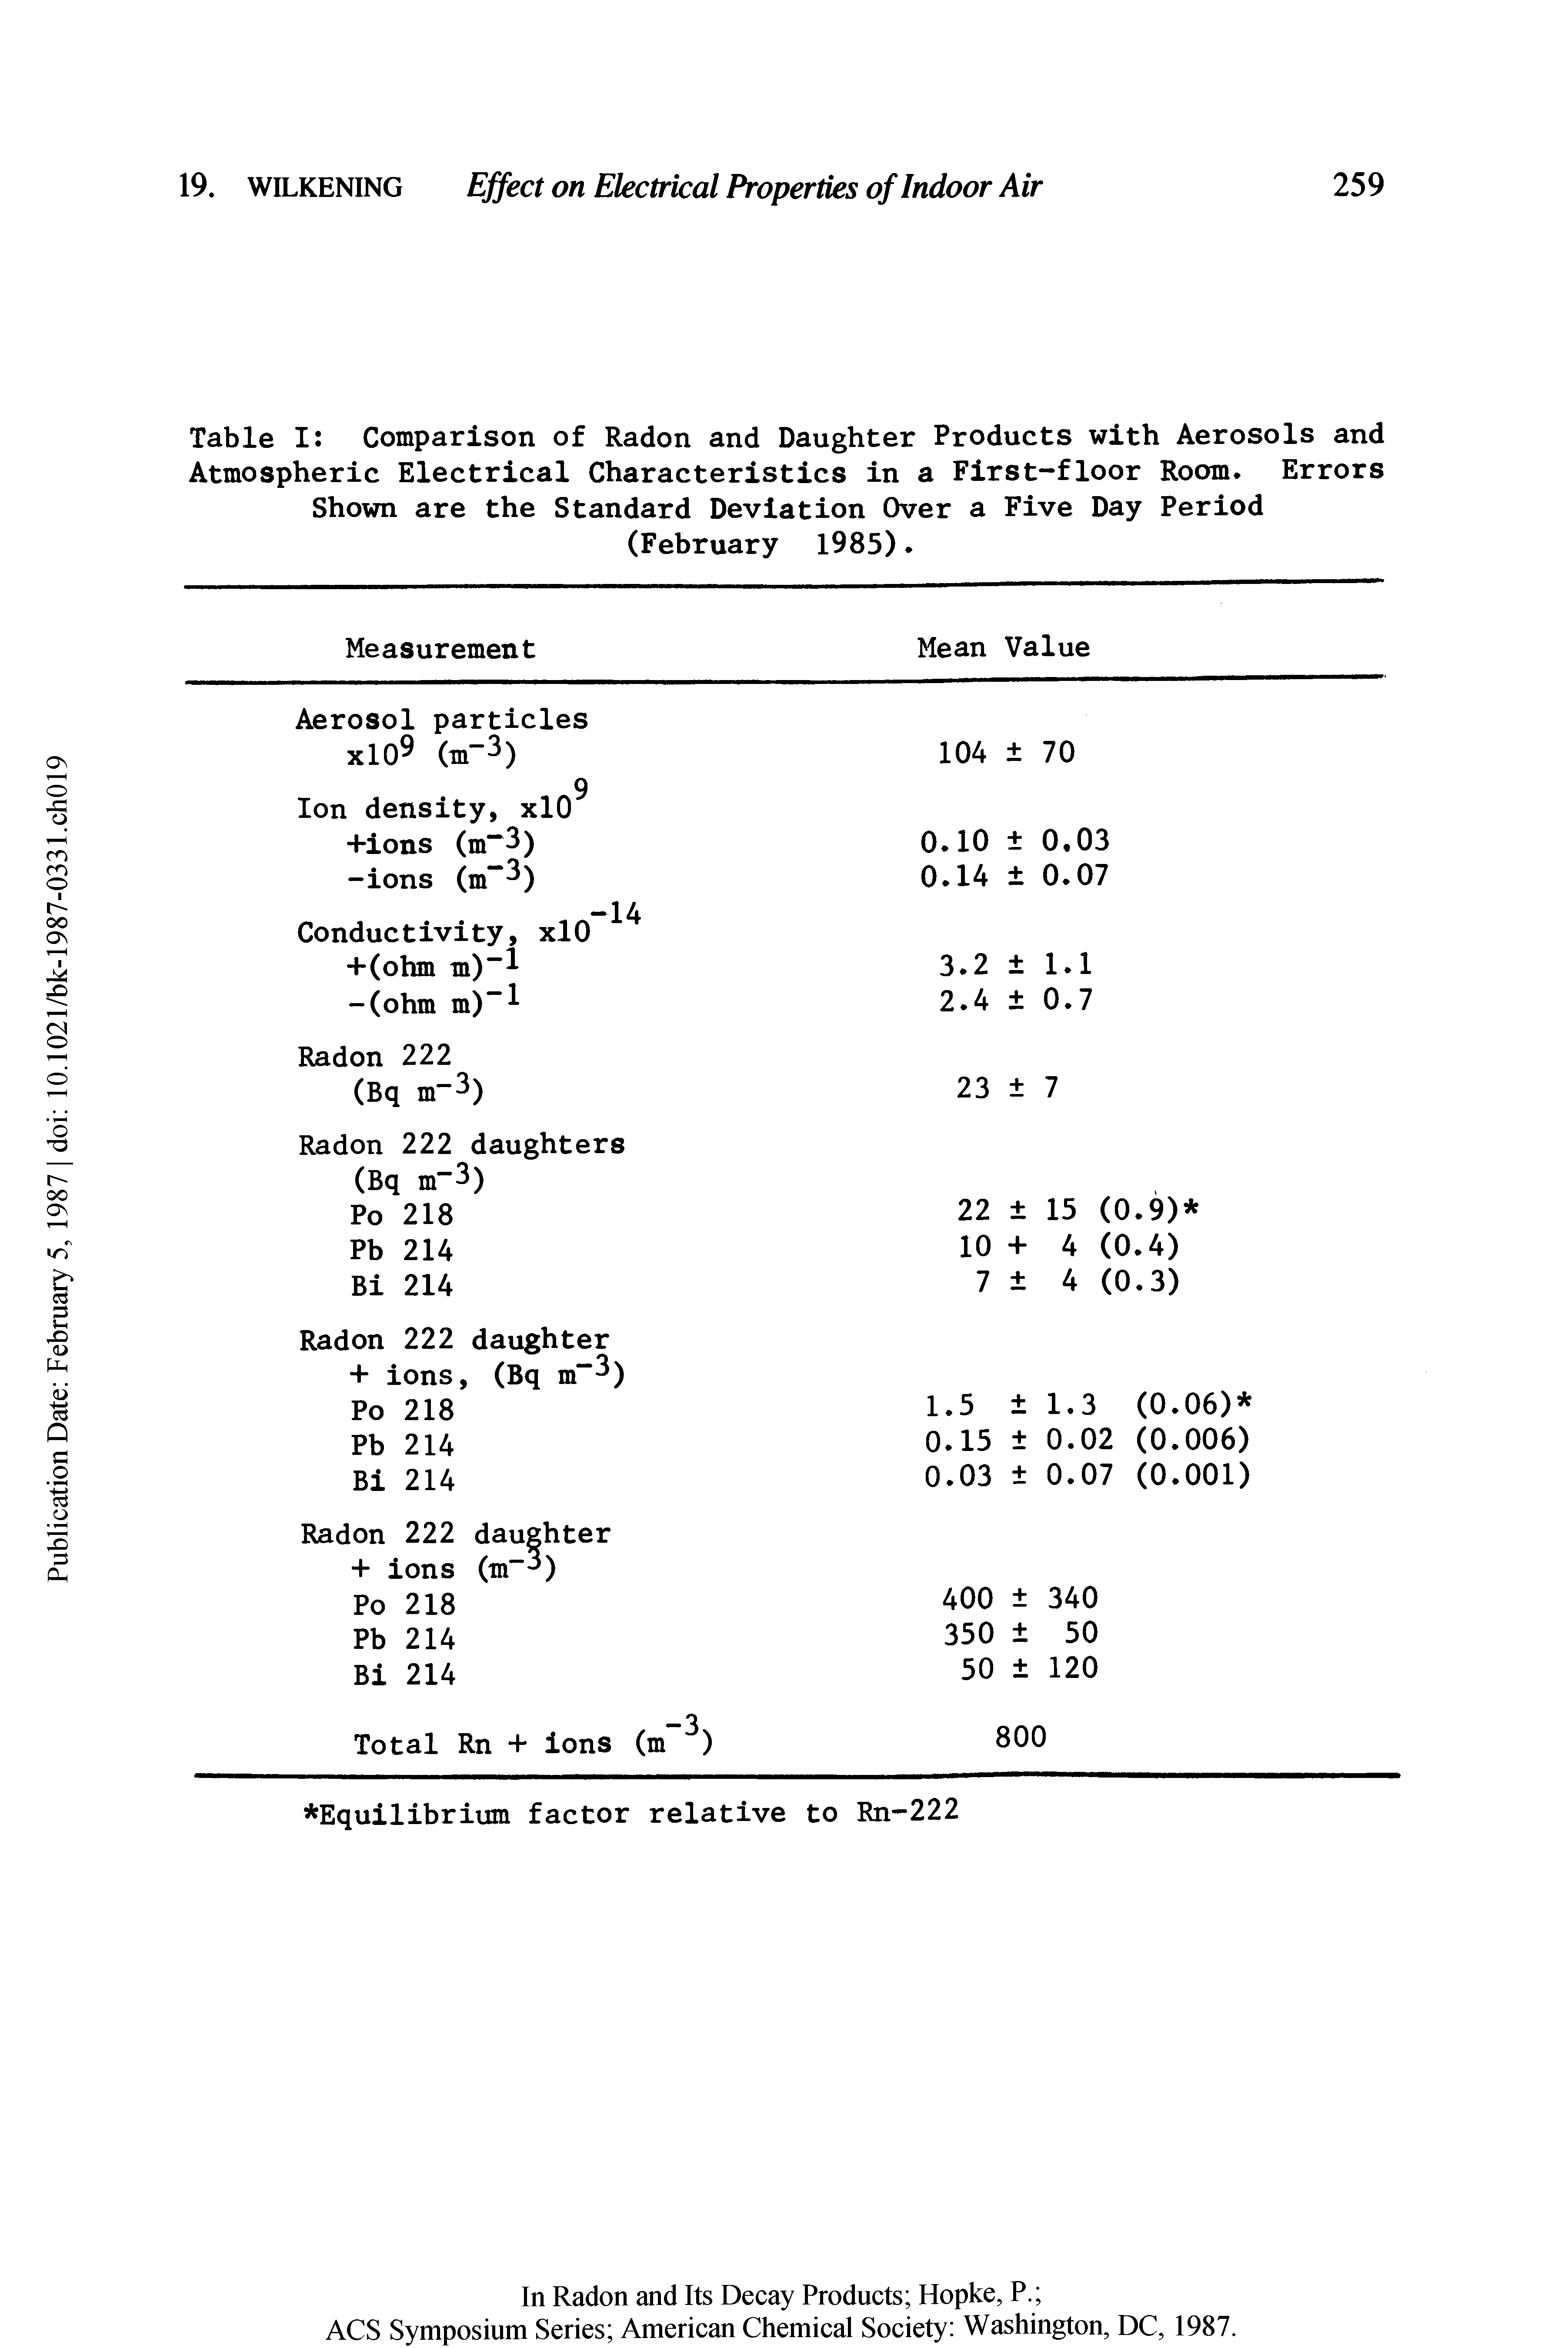 Table I Comparison of Radon and Daughter Products with Aerosols and Atmospheric Electrical Characteristics in a First-floor Room. Errors Shown are the Standard Deviation Over a Five Day Period (February 1985).